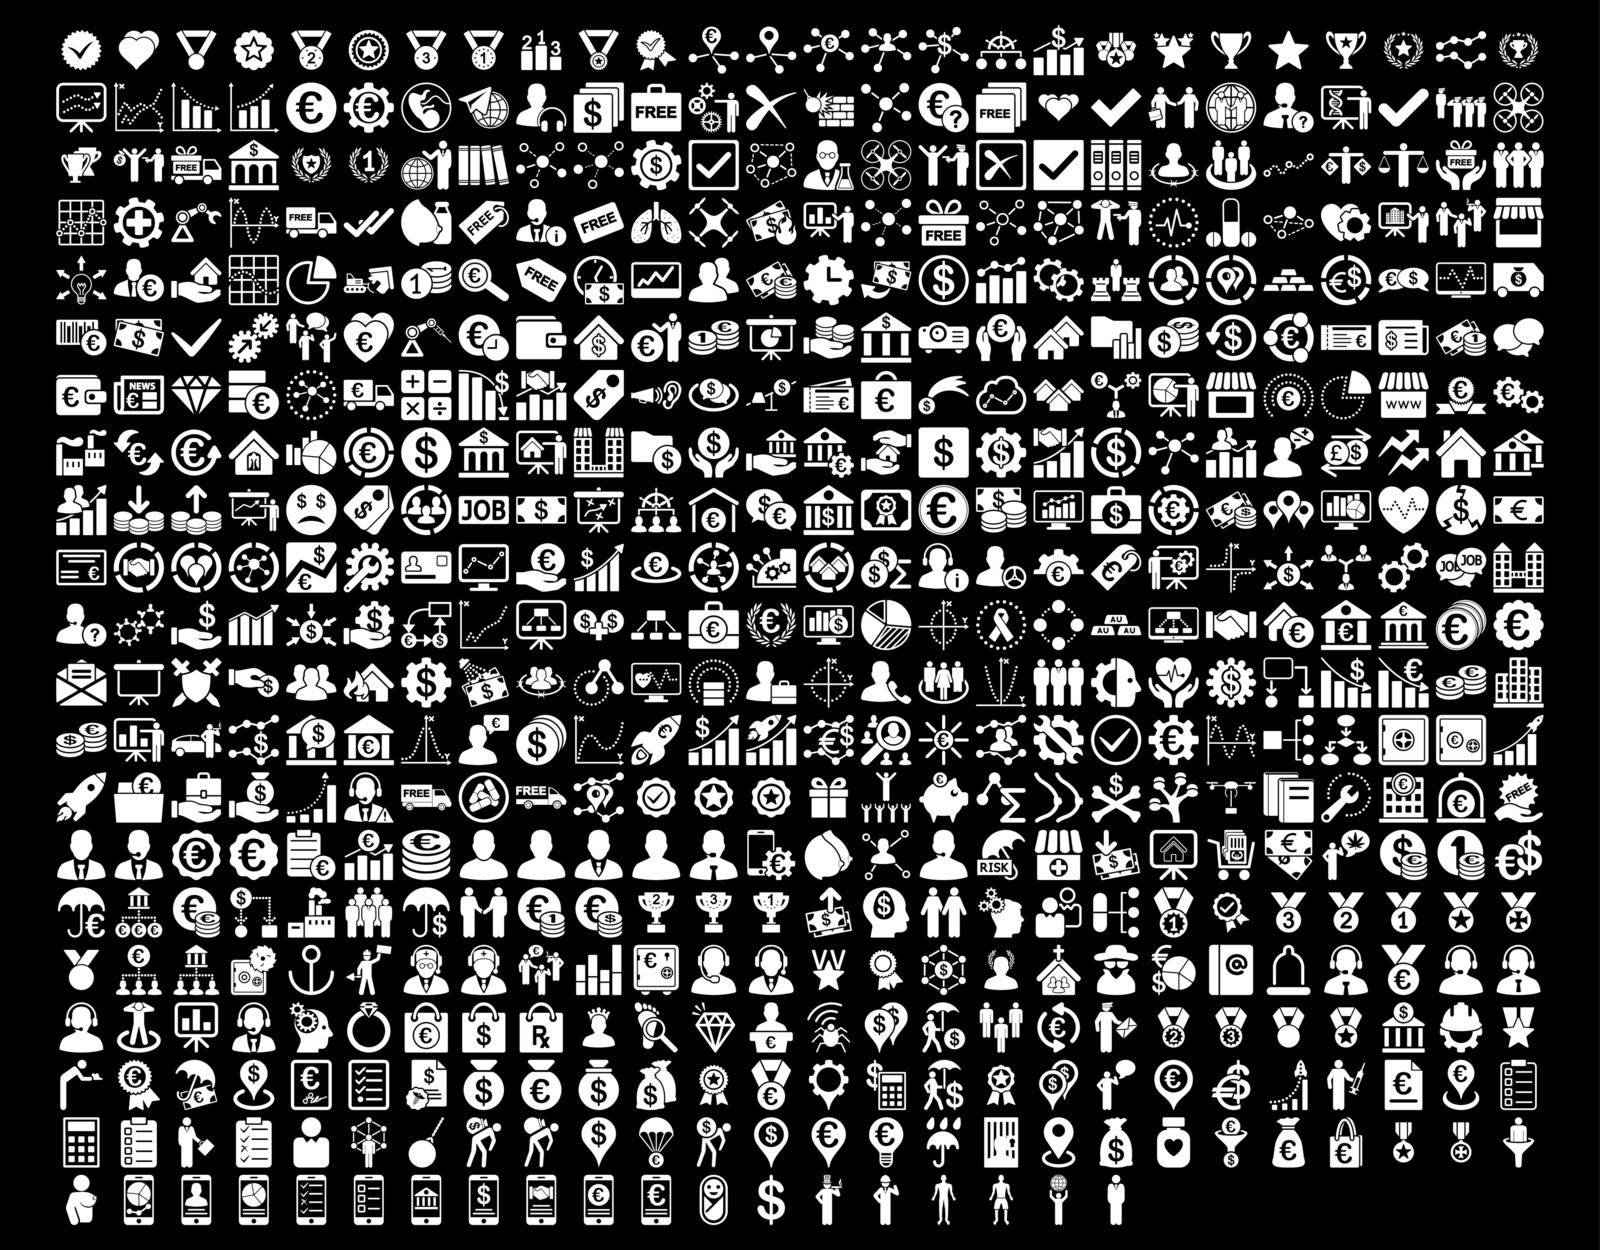 Application Toolbar Icons. 576 flat icons use white color. Vector images are isolated on a black background. 